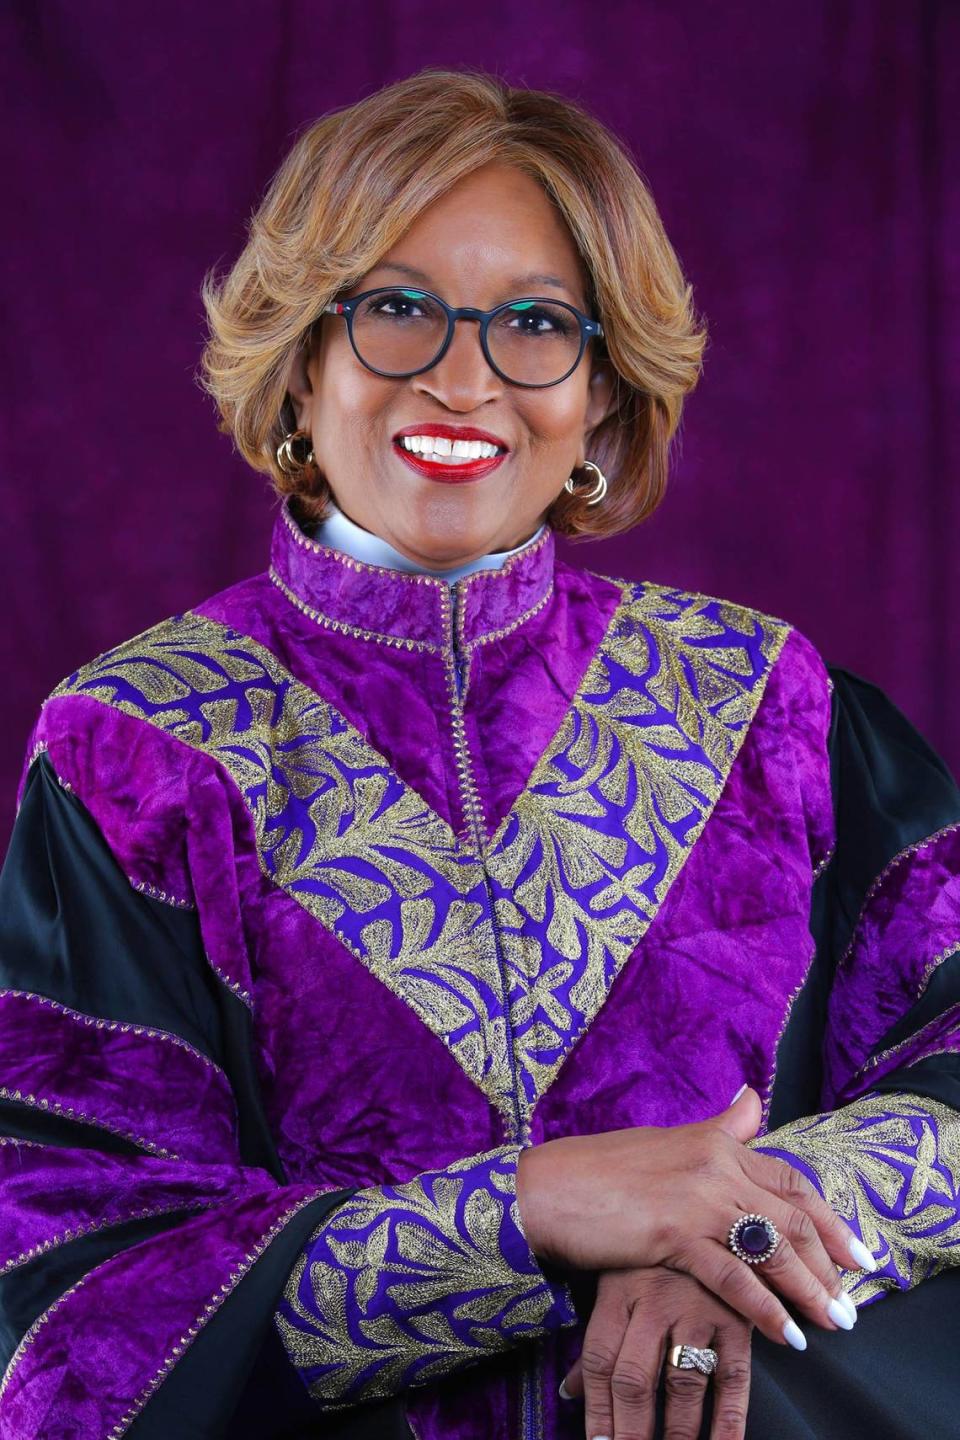 Bishop Vashti Murphy McKenzie delivered the keynote address for the Triangle Martin Luther King Jr. Committee’s virtual interfaith breakfast on 2022 MLK Day, which took place on Monday, Jan. 17.